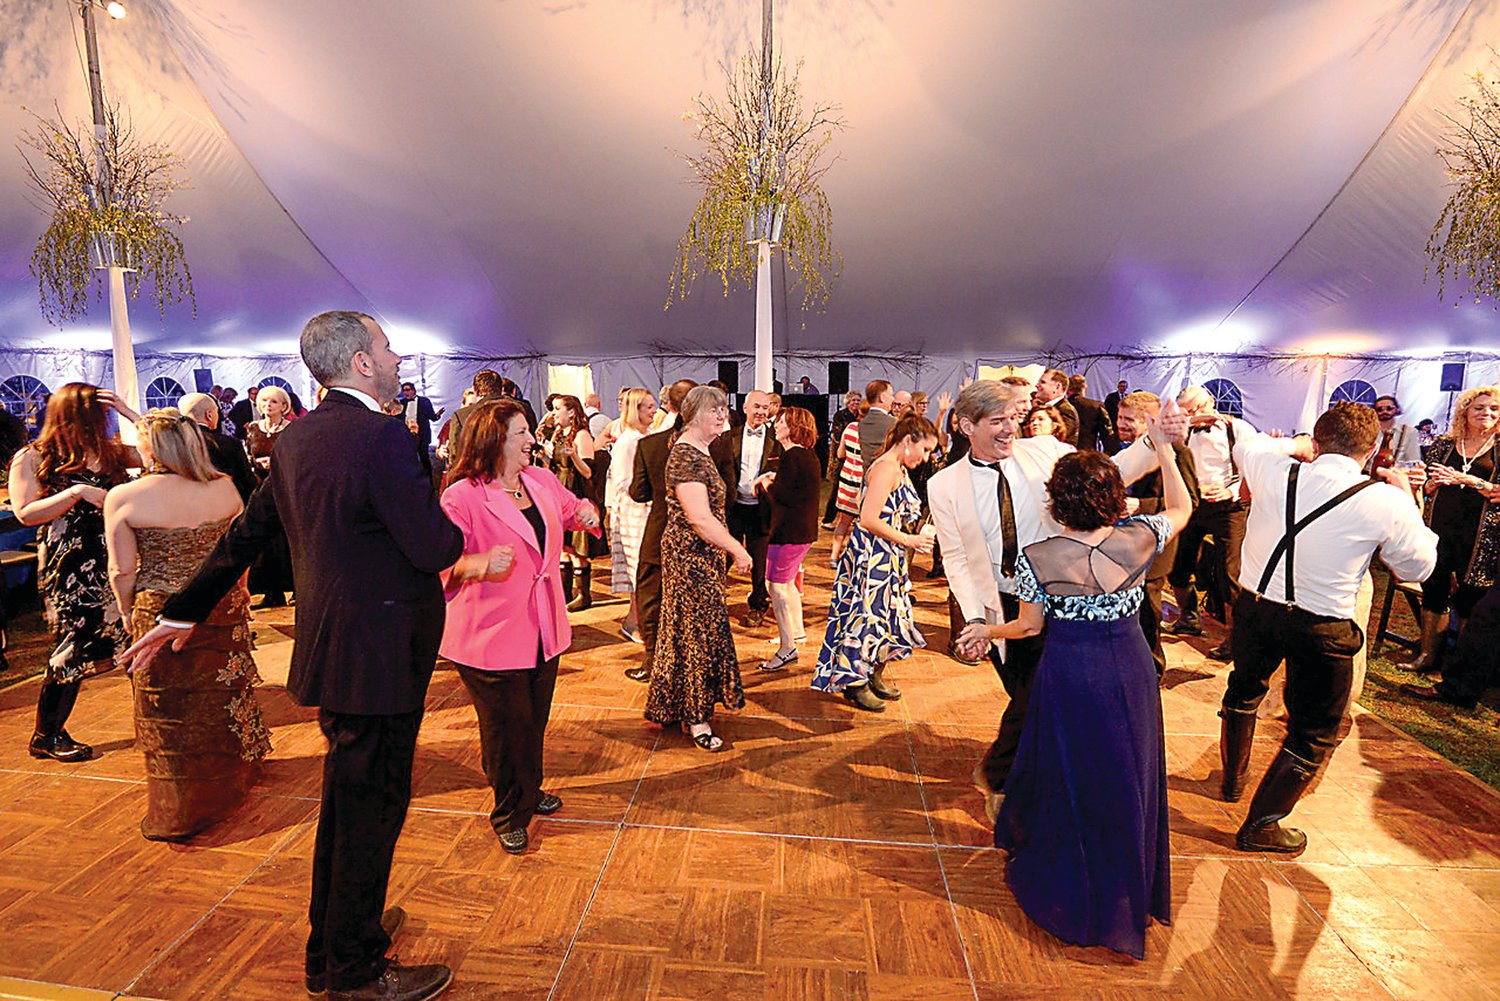 Guests at a previous Bowman’s Hill Wildflower Preserve dance the night away. The 17th Spring Wildflower Gala is Saturday, April 25.